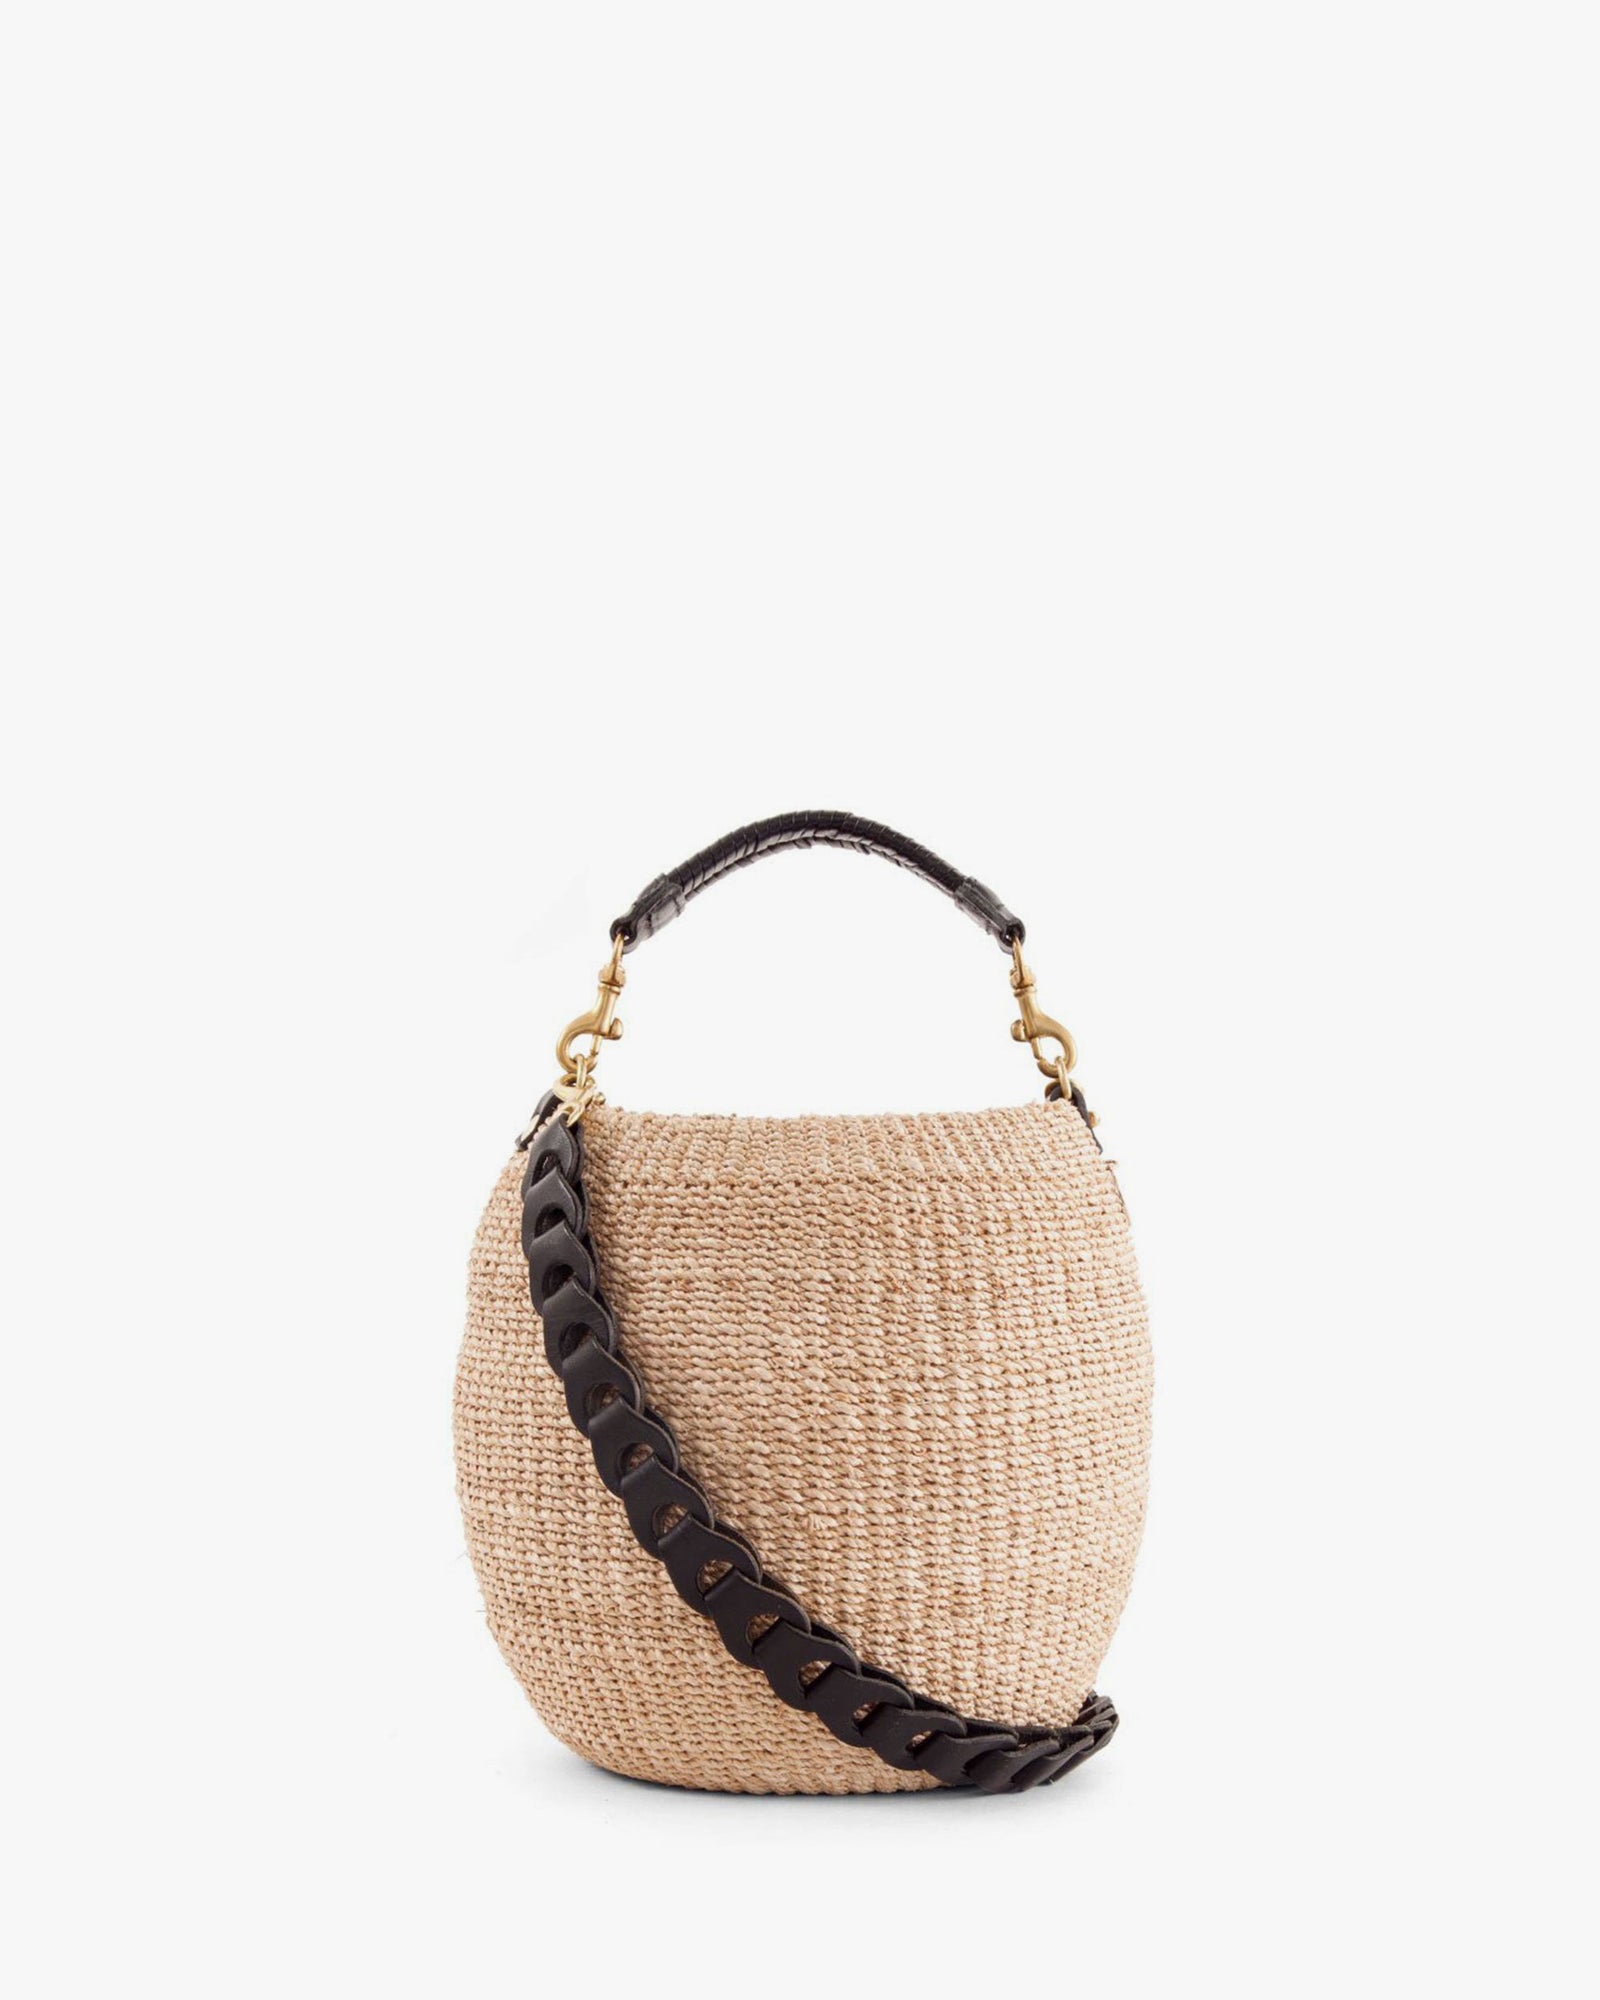 The Clare V Pot De Miel: This Woven Bucket Bag Is Totally Worth It